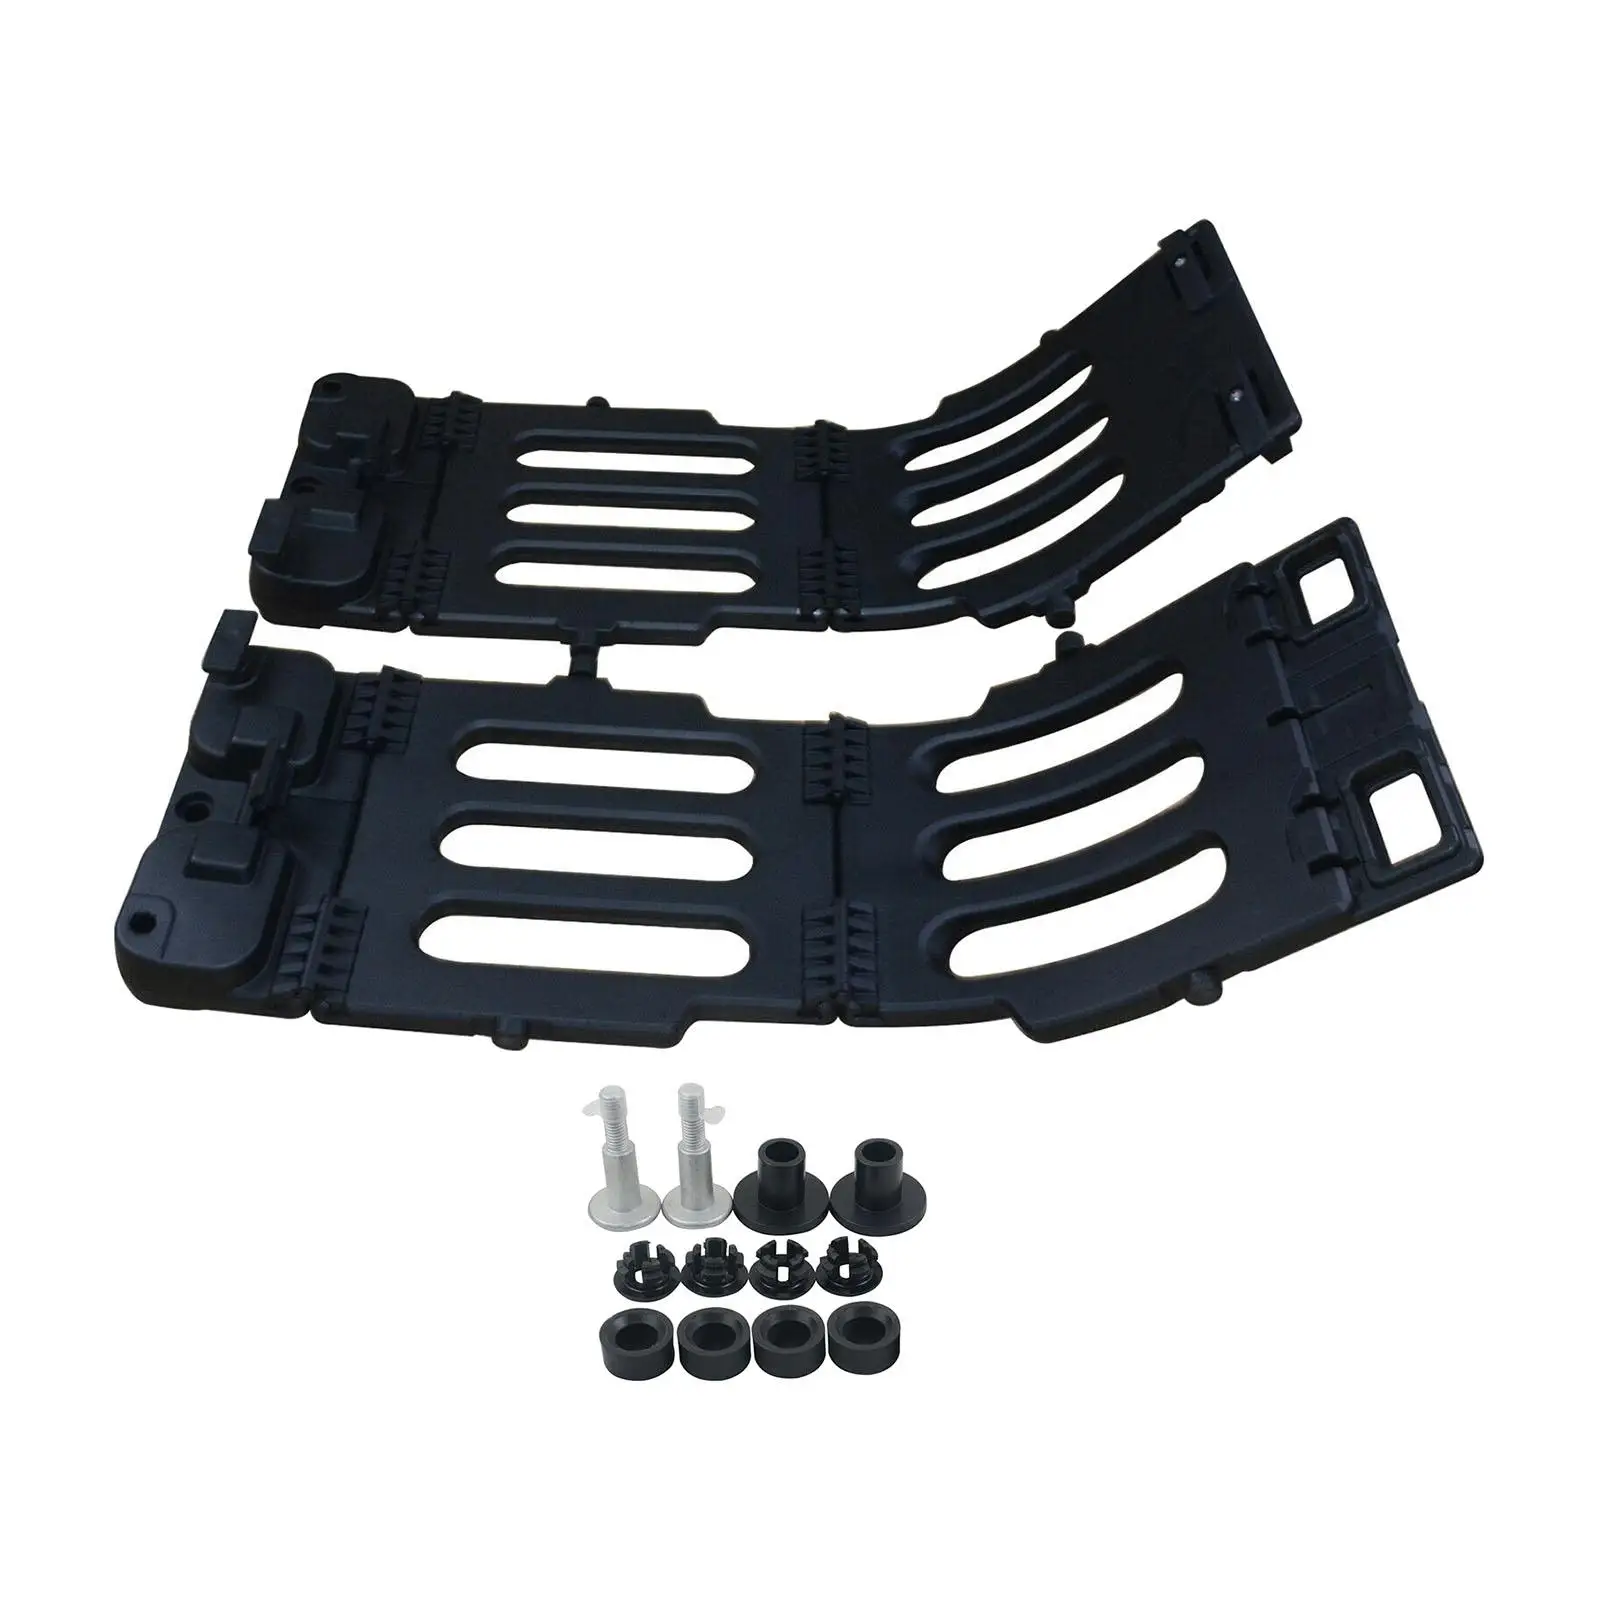 Stowable Tailgate Bed Extender Brackets Kit fl3Z-99286A40-C fl3Z99286A40C for Ford F150 Replaces Accessories Black Spare Parts